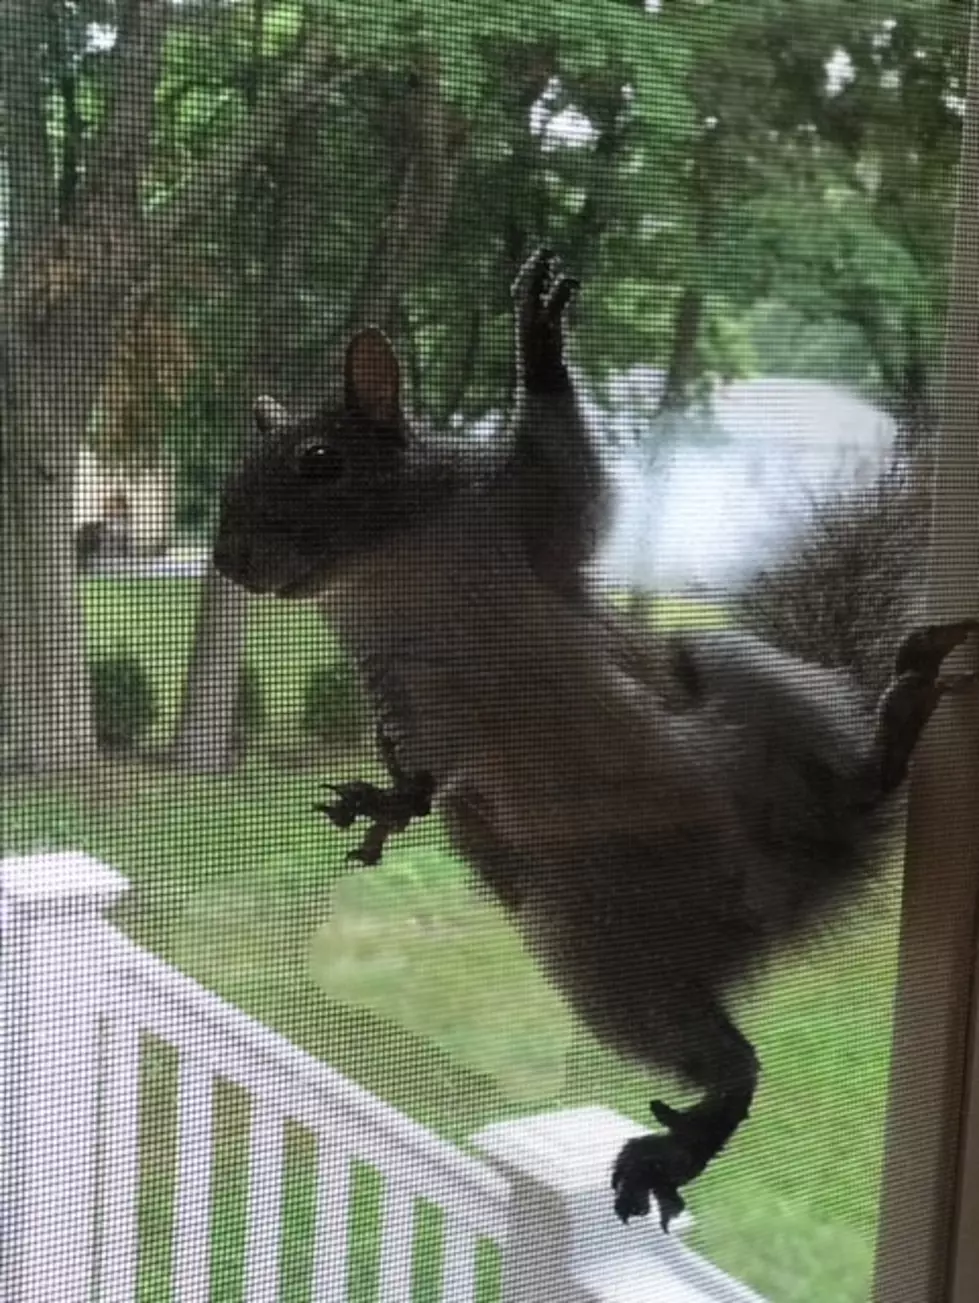 Has a Squirrel Ever Done This to You?